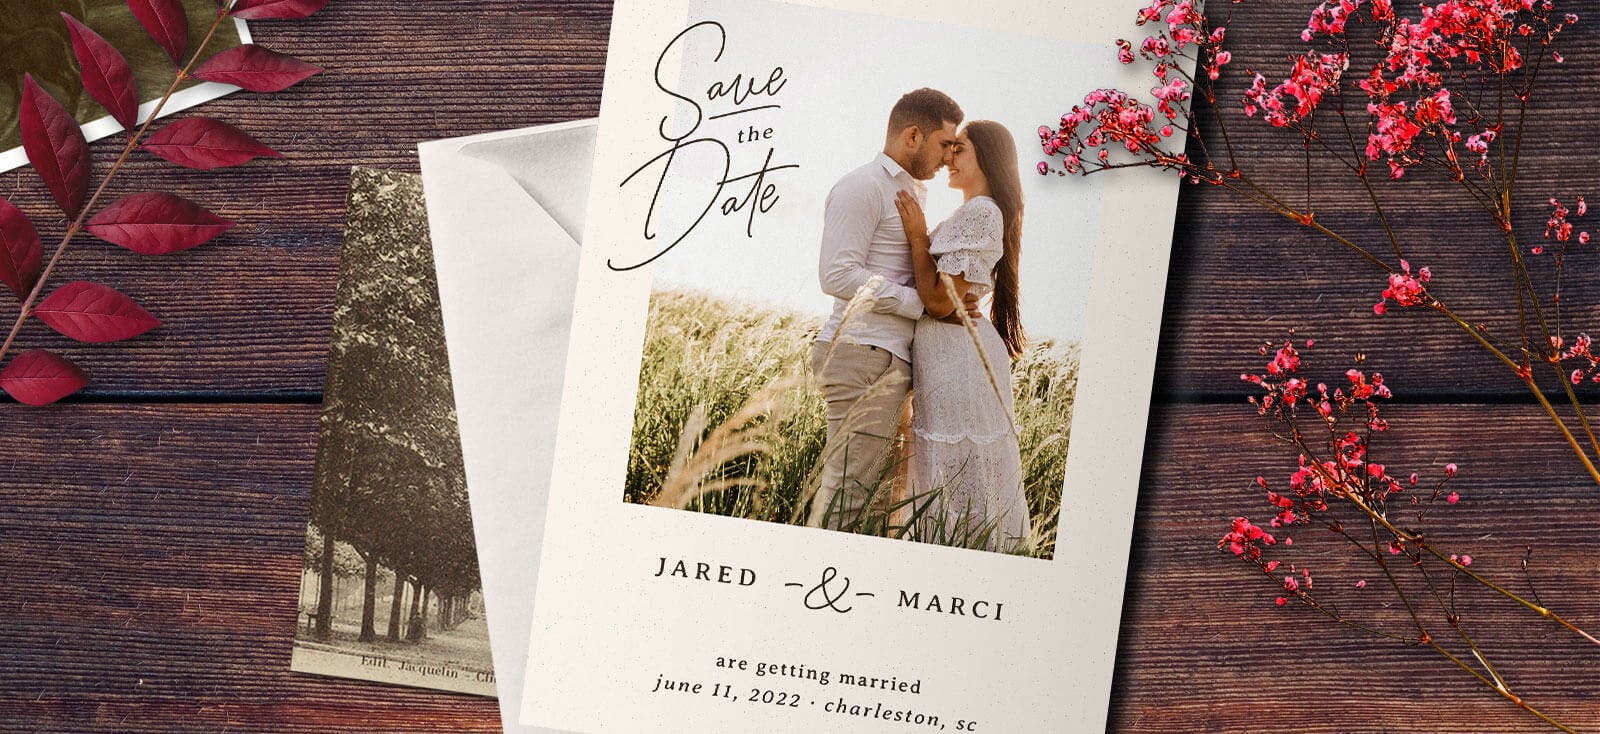 How to Easily Create a "Save the Date" Wedding Card Design | Tutorial